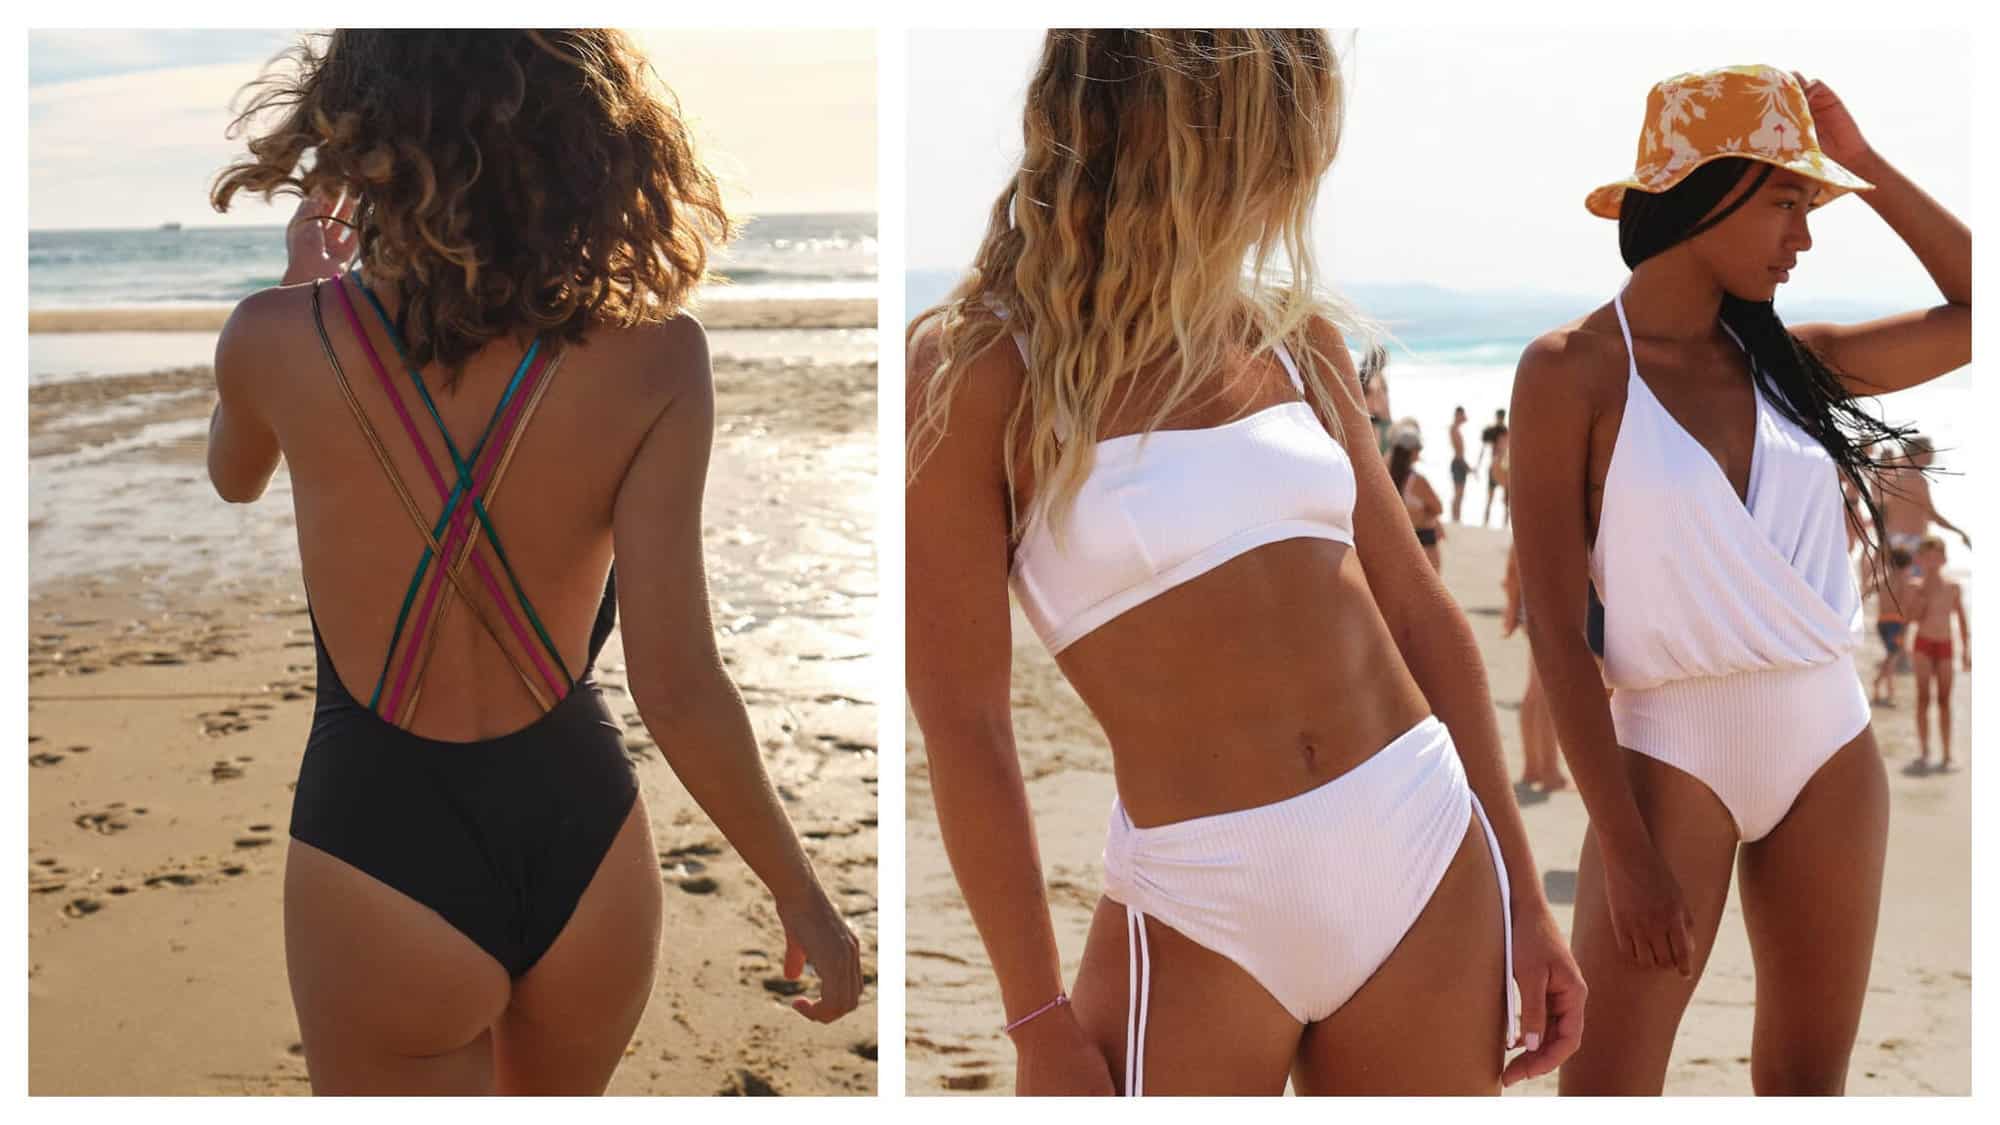 Left: a woman walking down the beach towards the ocean with her back to us, wearing a black swimsuit with gold, pink, and blue straps by Albertine. Right: two women on the beach wearing white swimsuits by Albertine, one is a bikini and one is a one-piece. 